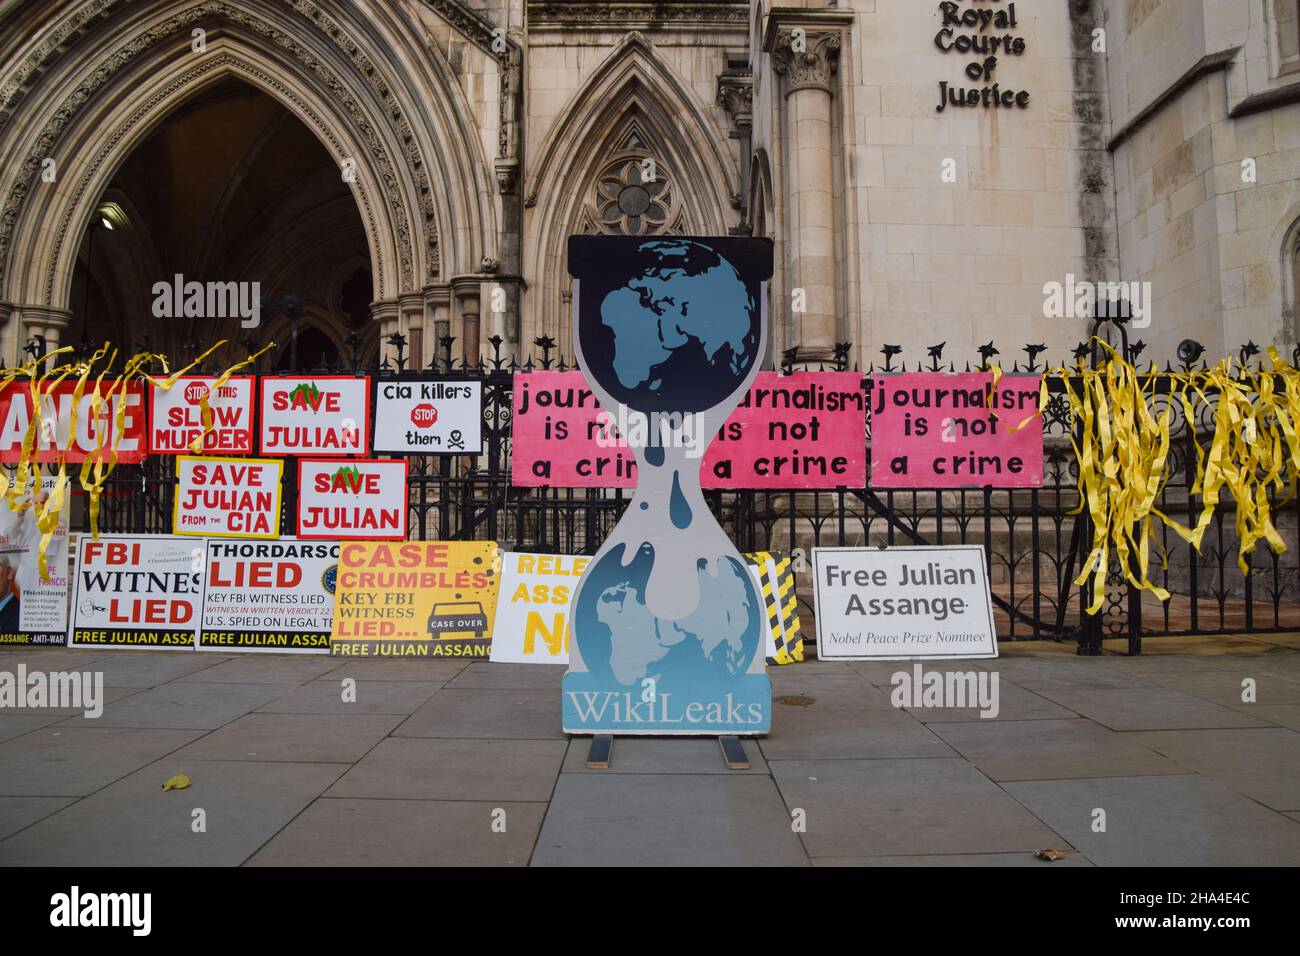 London, UK. 10th Dec, 2021. Protesters gathered outside the Royal Courts of Justice in support of Julian Assange, as the US Government wins its appeal against the decision not to extradite the WikiLeaks founder. Stock Photo